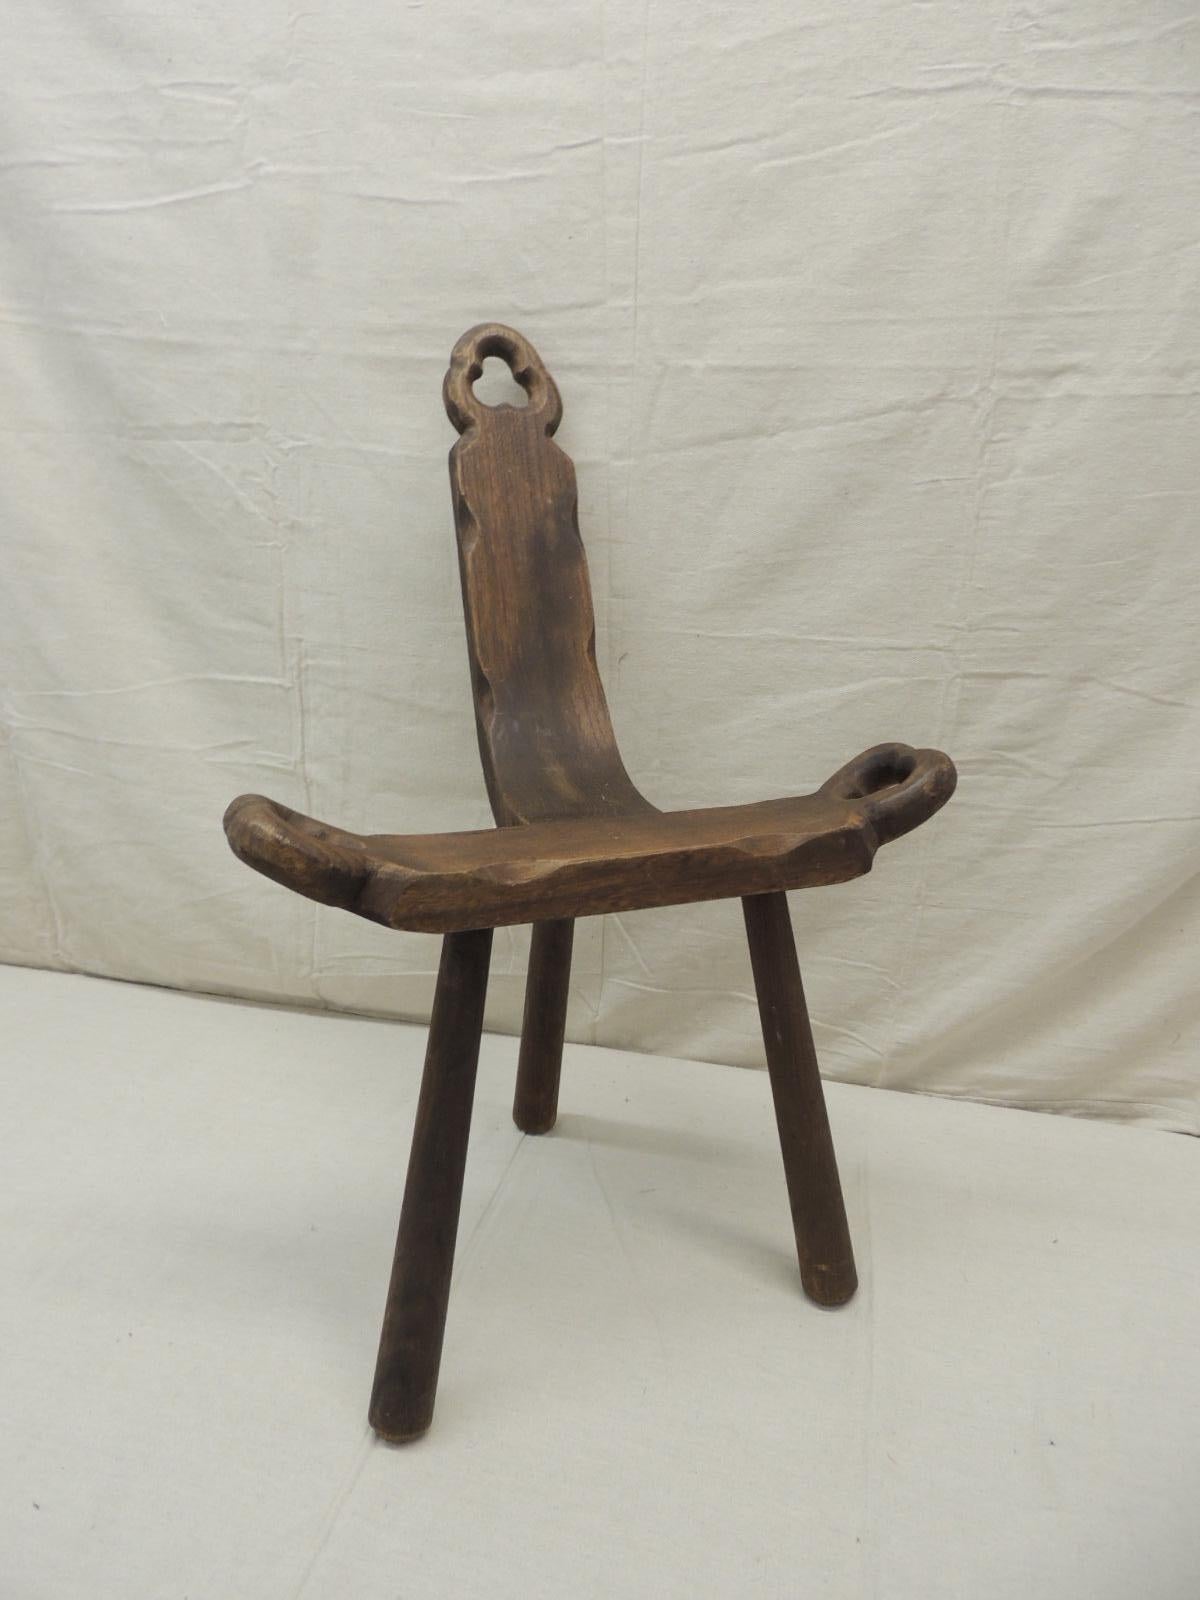 Vintage Tripod Legs Wood Birthing Petite Side Chair.
Hand carved with three round legs.
Size: 19